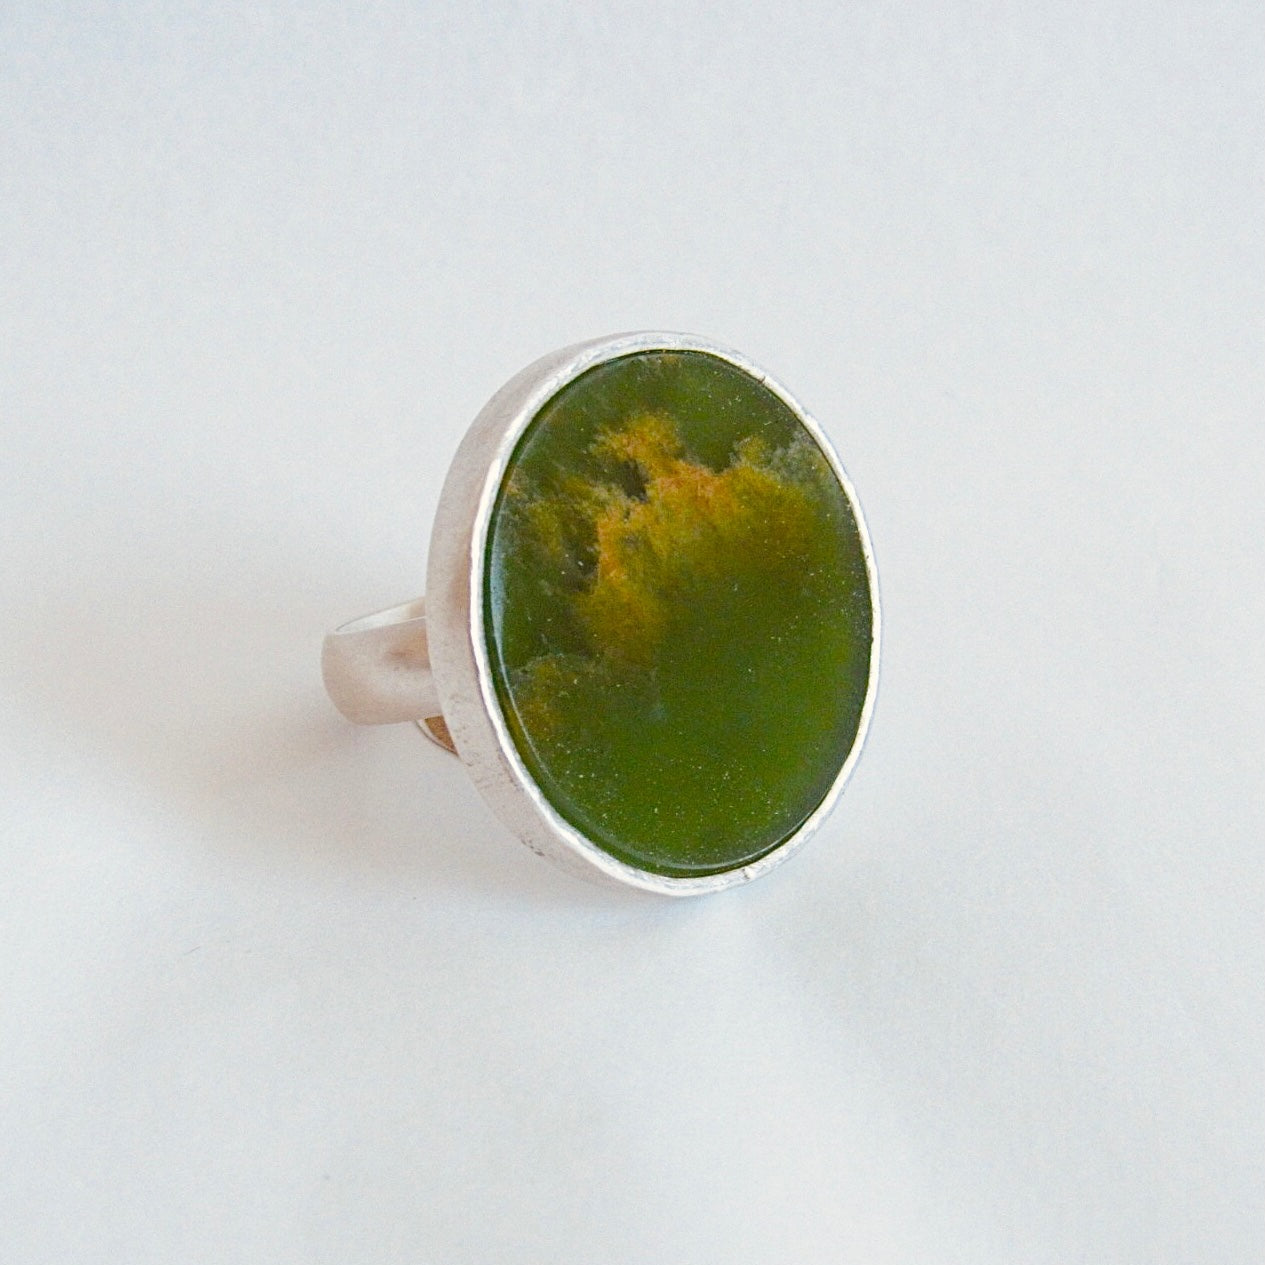 Silver ring with circular green stone